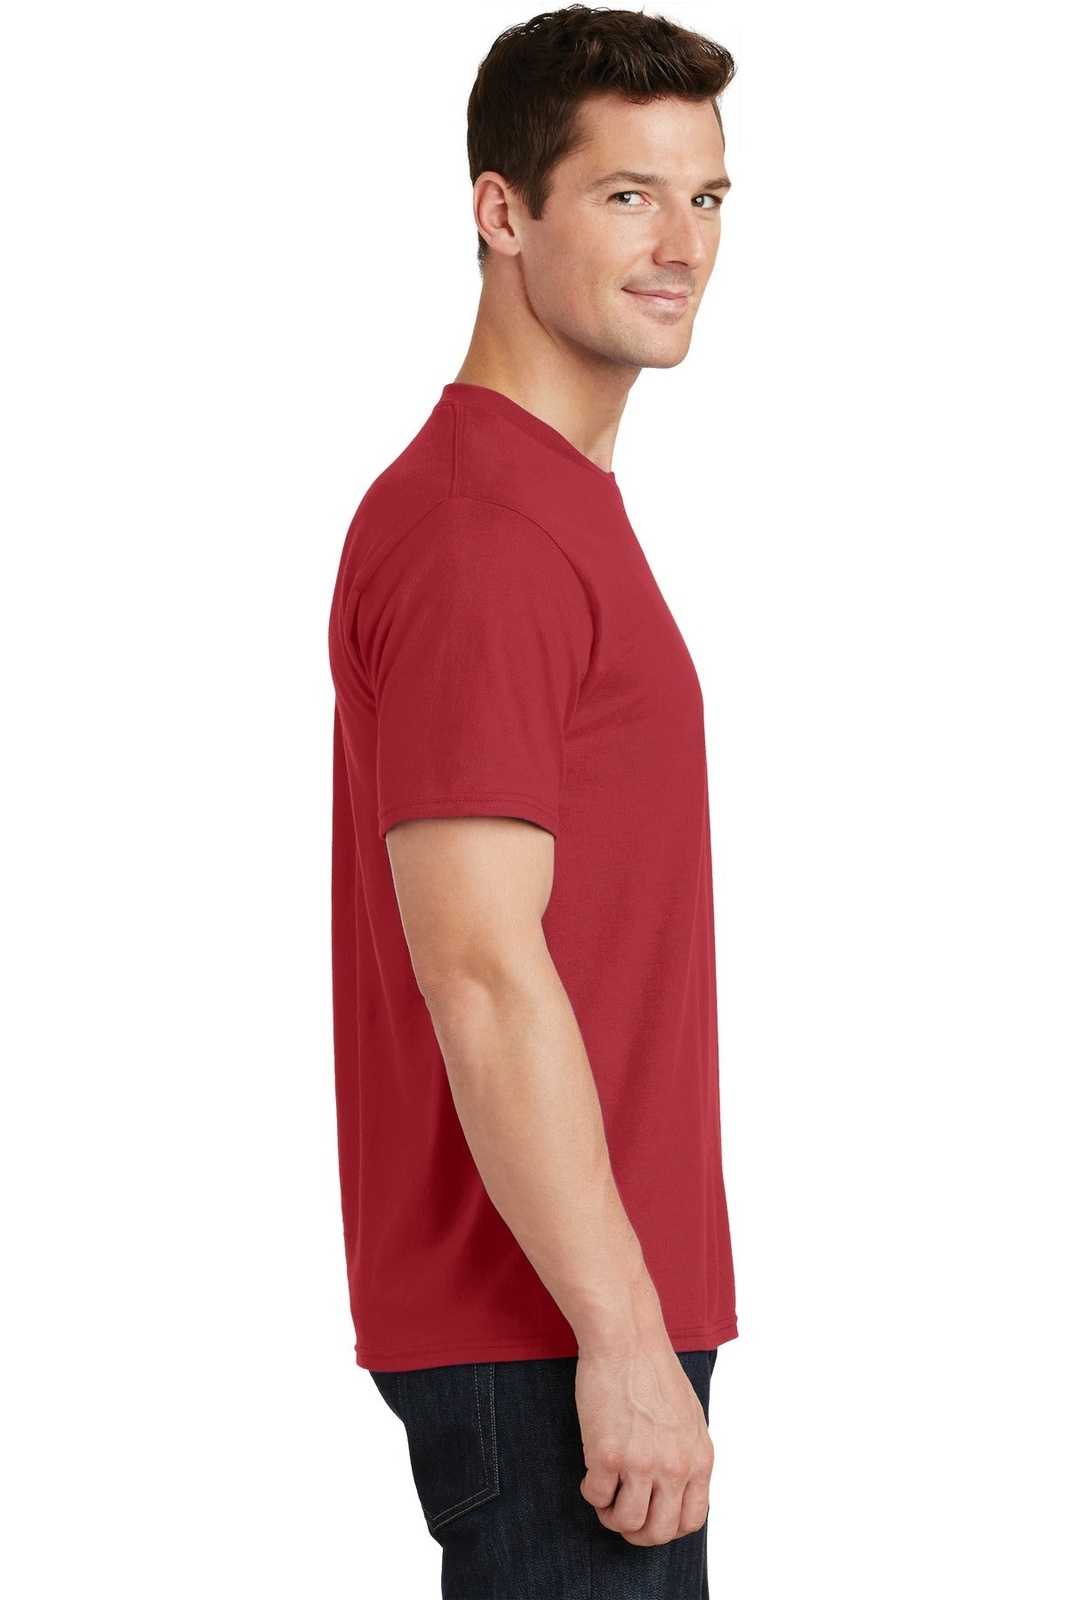 Port &amp; Company PC450 Fan Favorite Tee - Cardinal Red - HIT a Double - 3